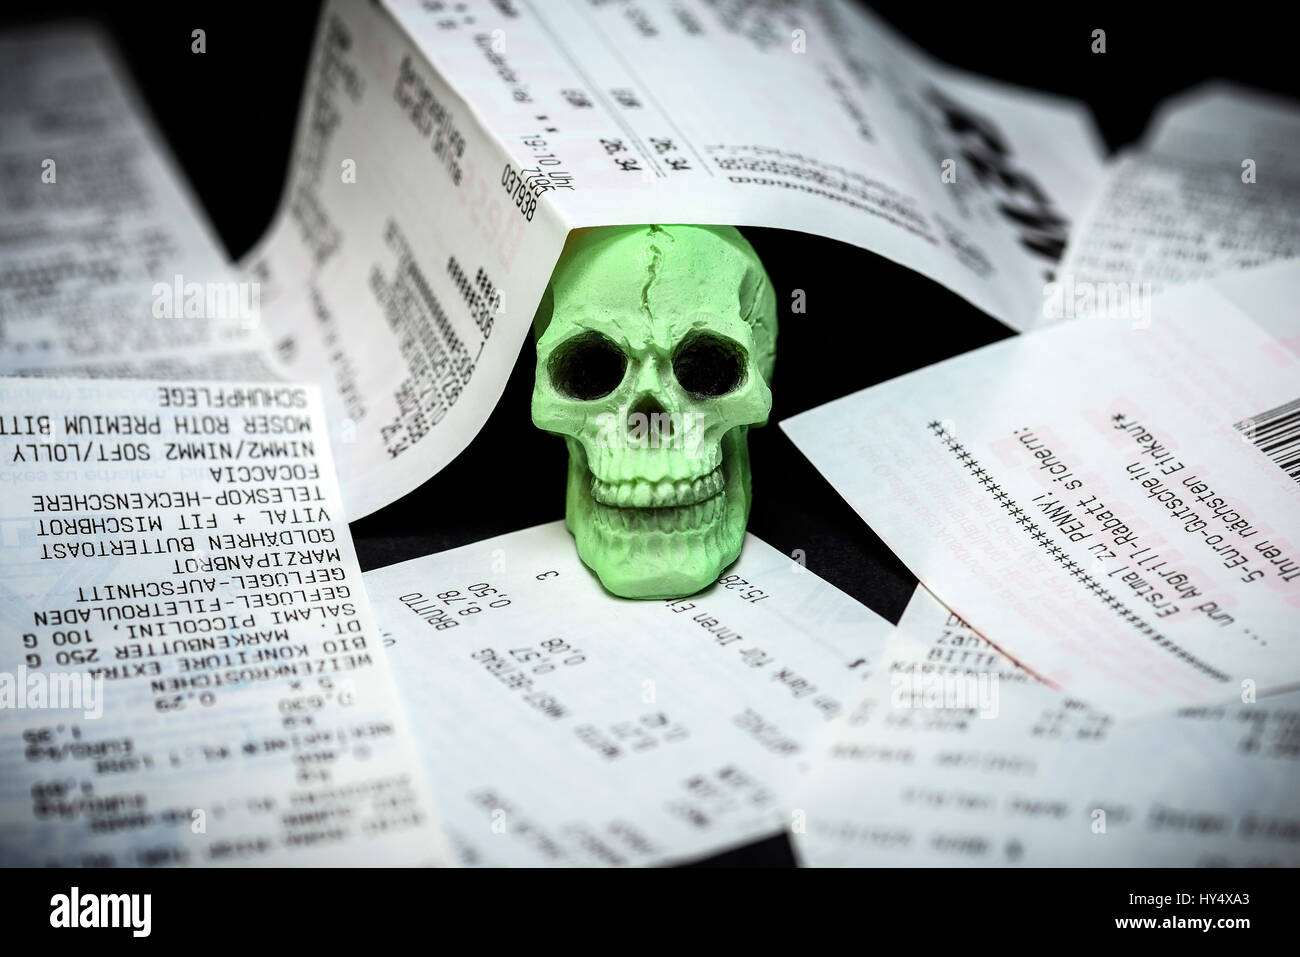 Receipts and death's-head, injurious Bisphenol A in thermo paper, Kassenbons und Totenkopf, schaedliches Bisphenol A in Thermopapier Stock Photo